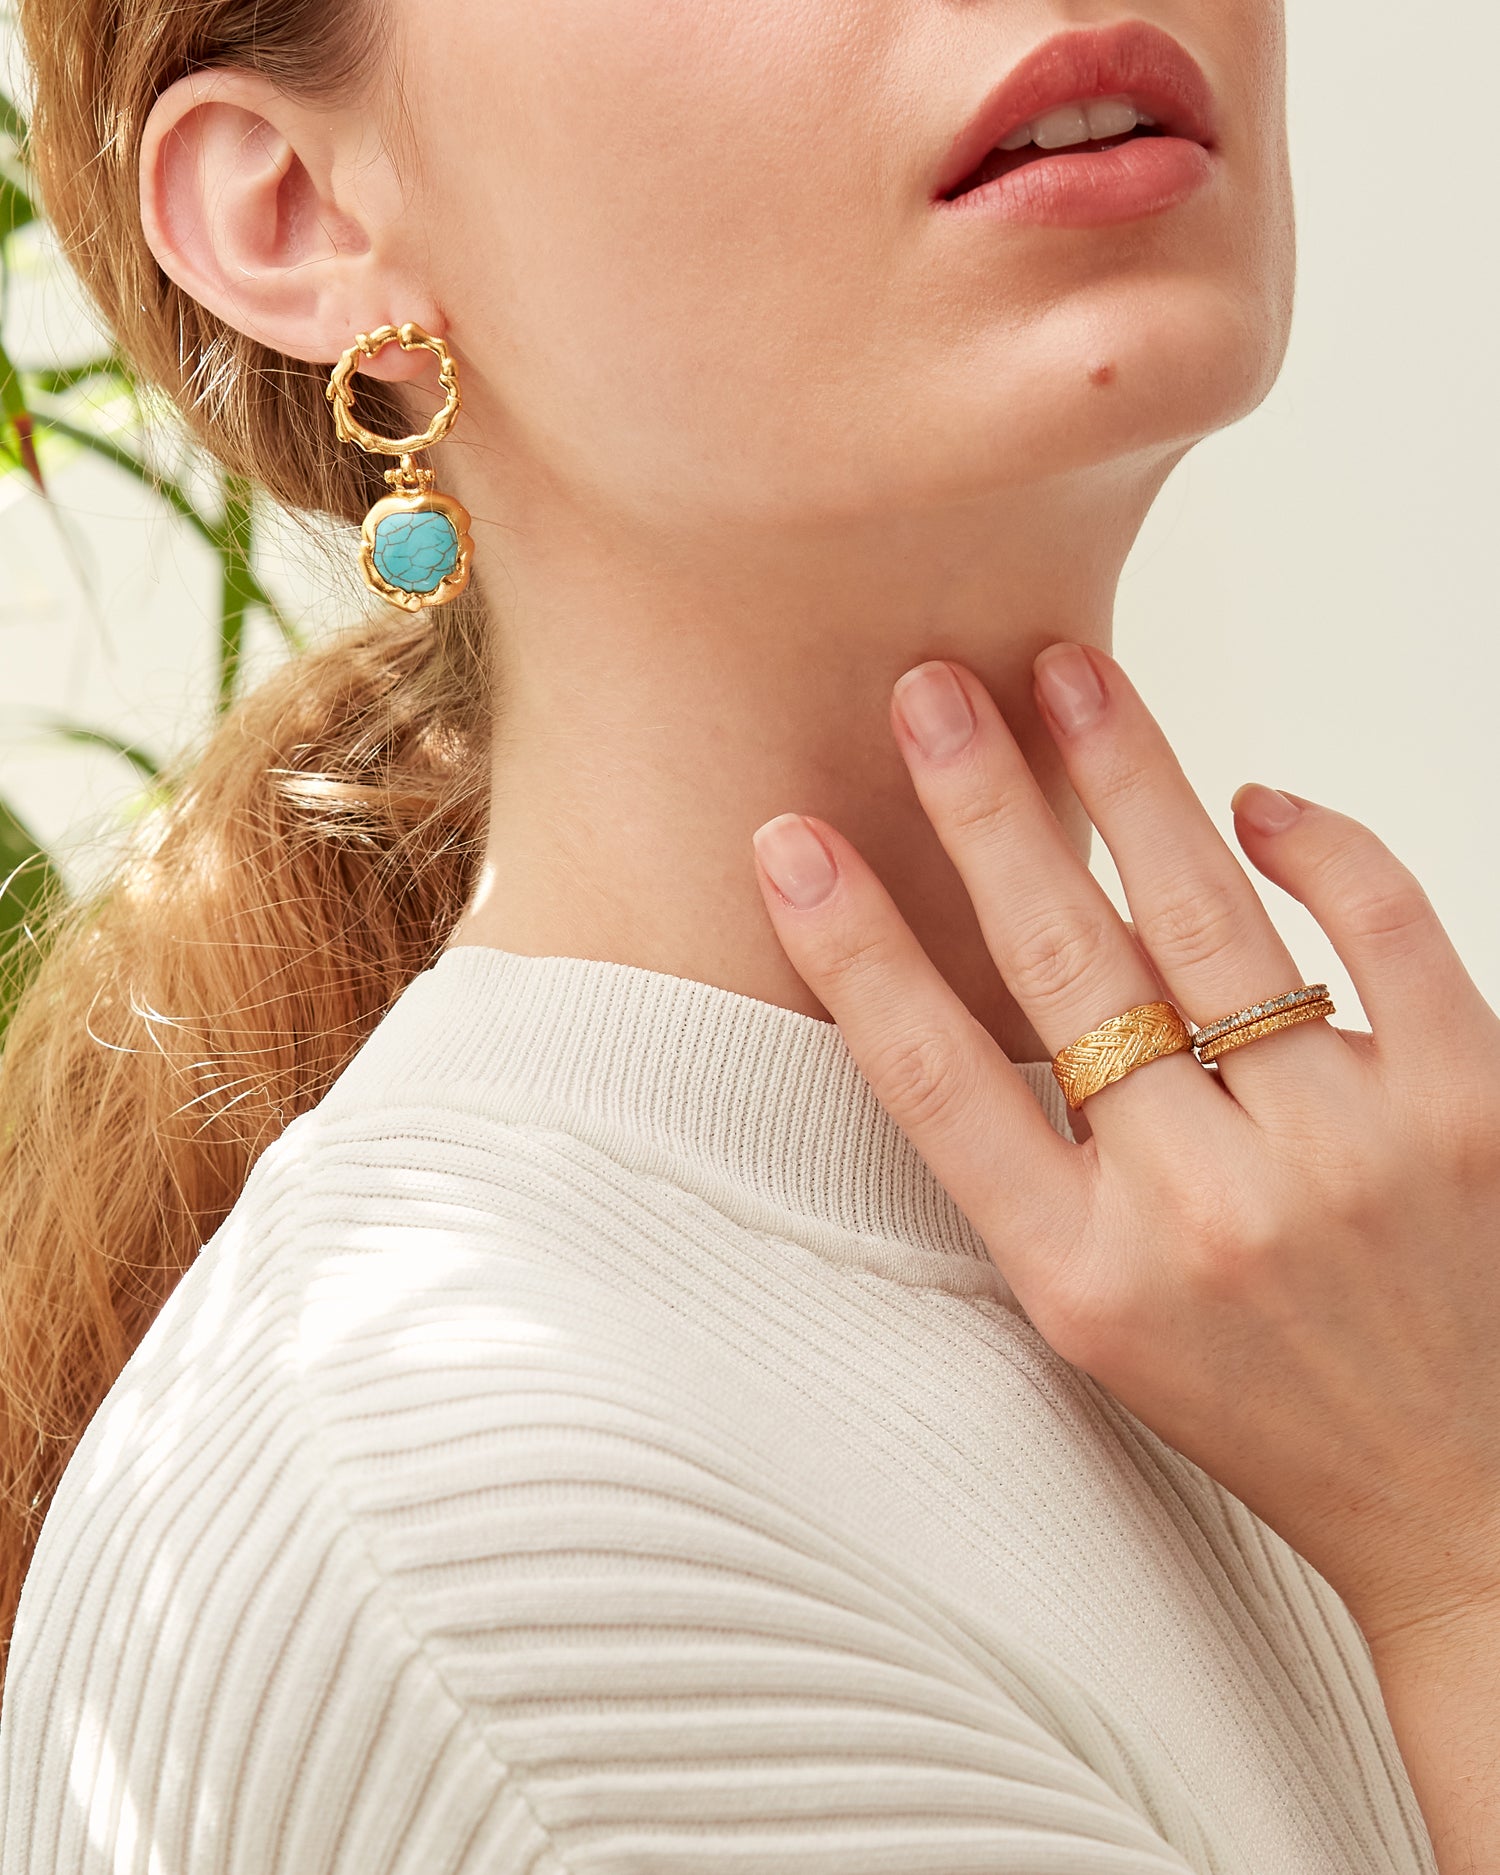 Demetra Braided Stacking Ring | Sustainable Jewellery by Ottoman Hands